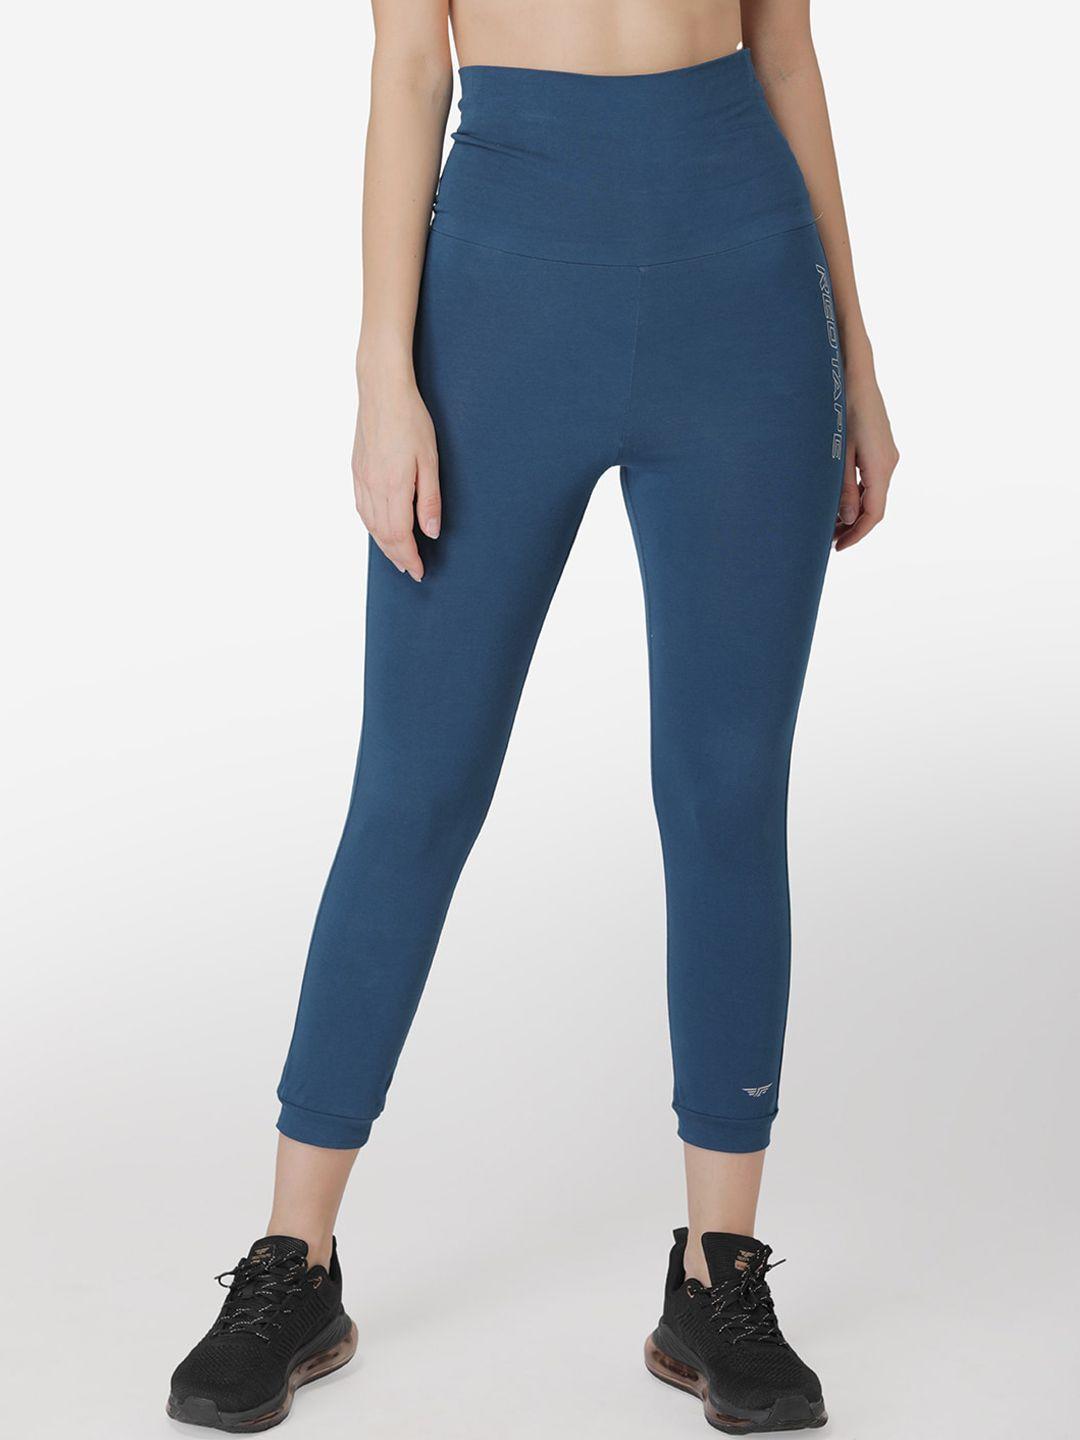 red tape women blue solid sports tights